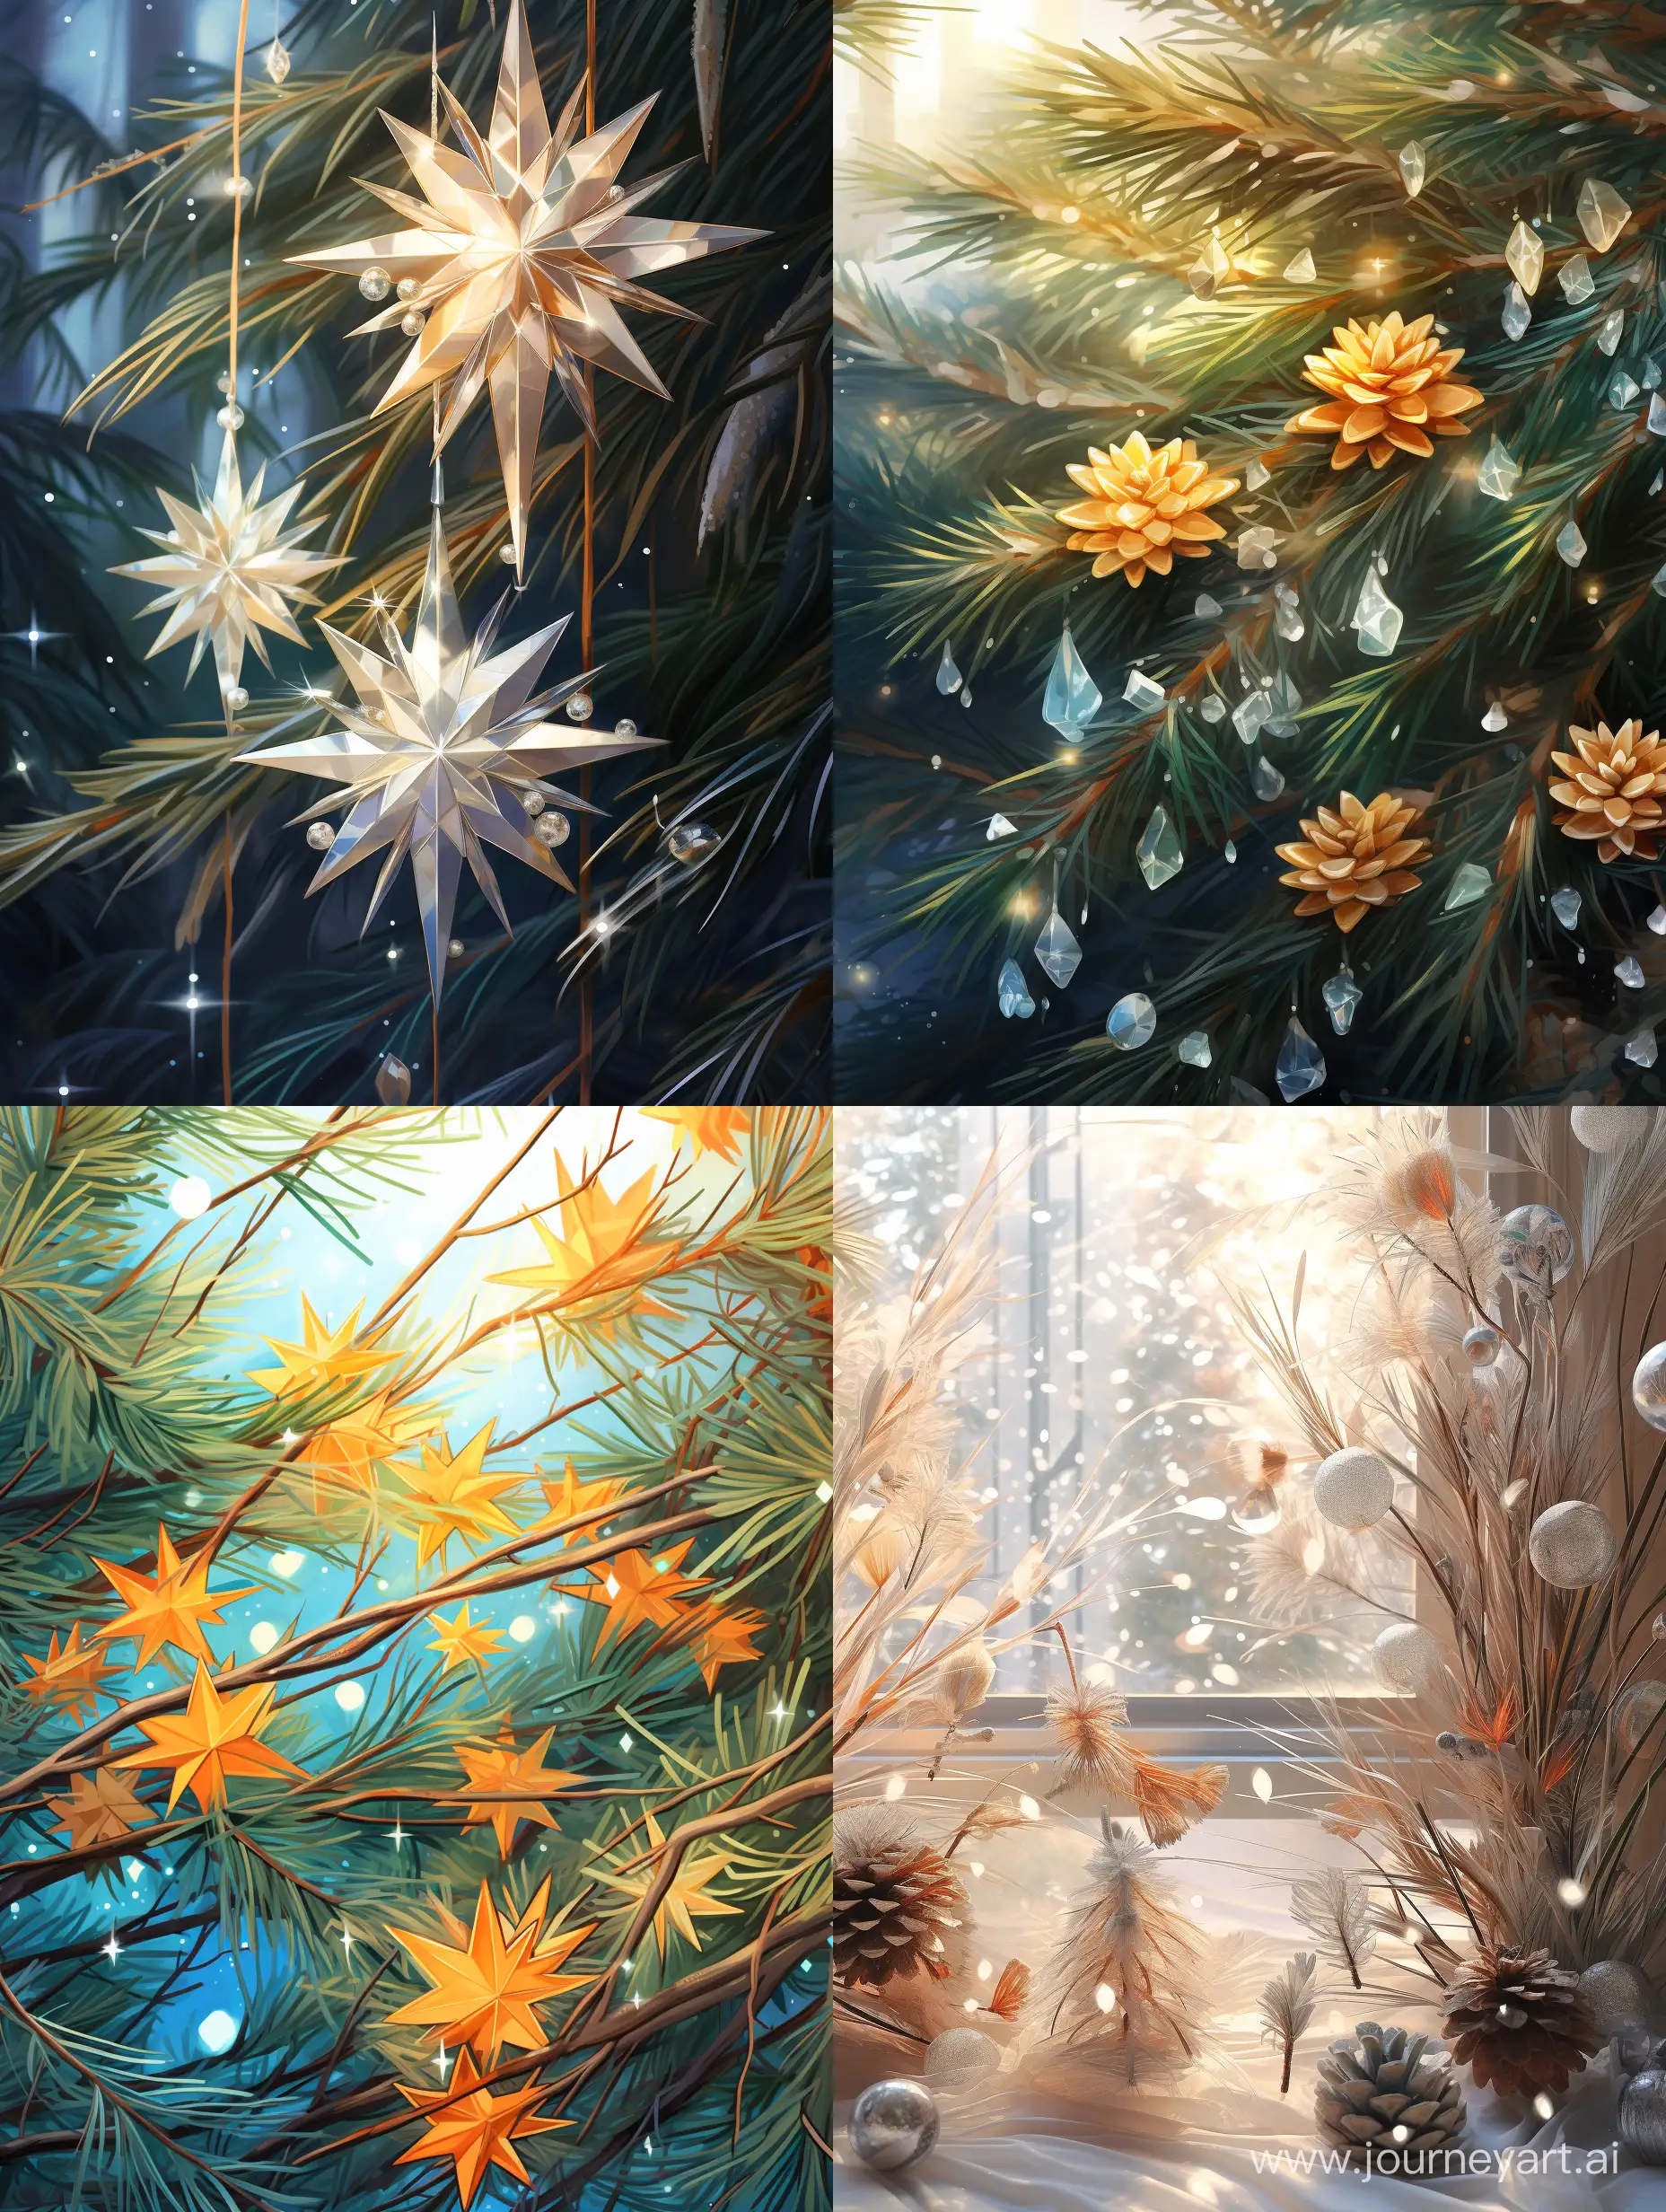 Enchanting-Winter-Morning-Sunlit-Pine-Branches-with-Crystal-Stars-and-Snowflakes